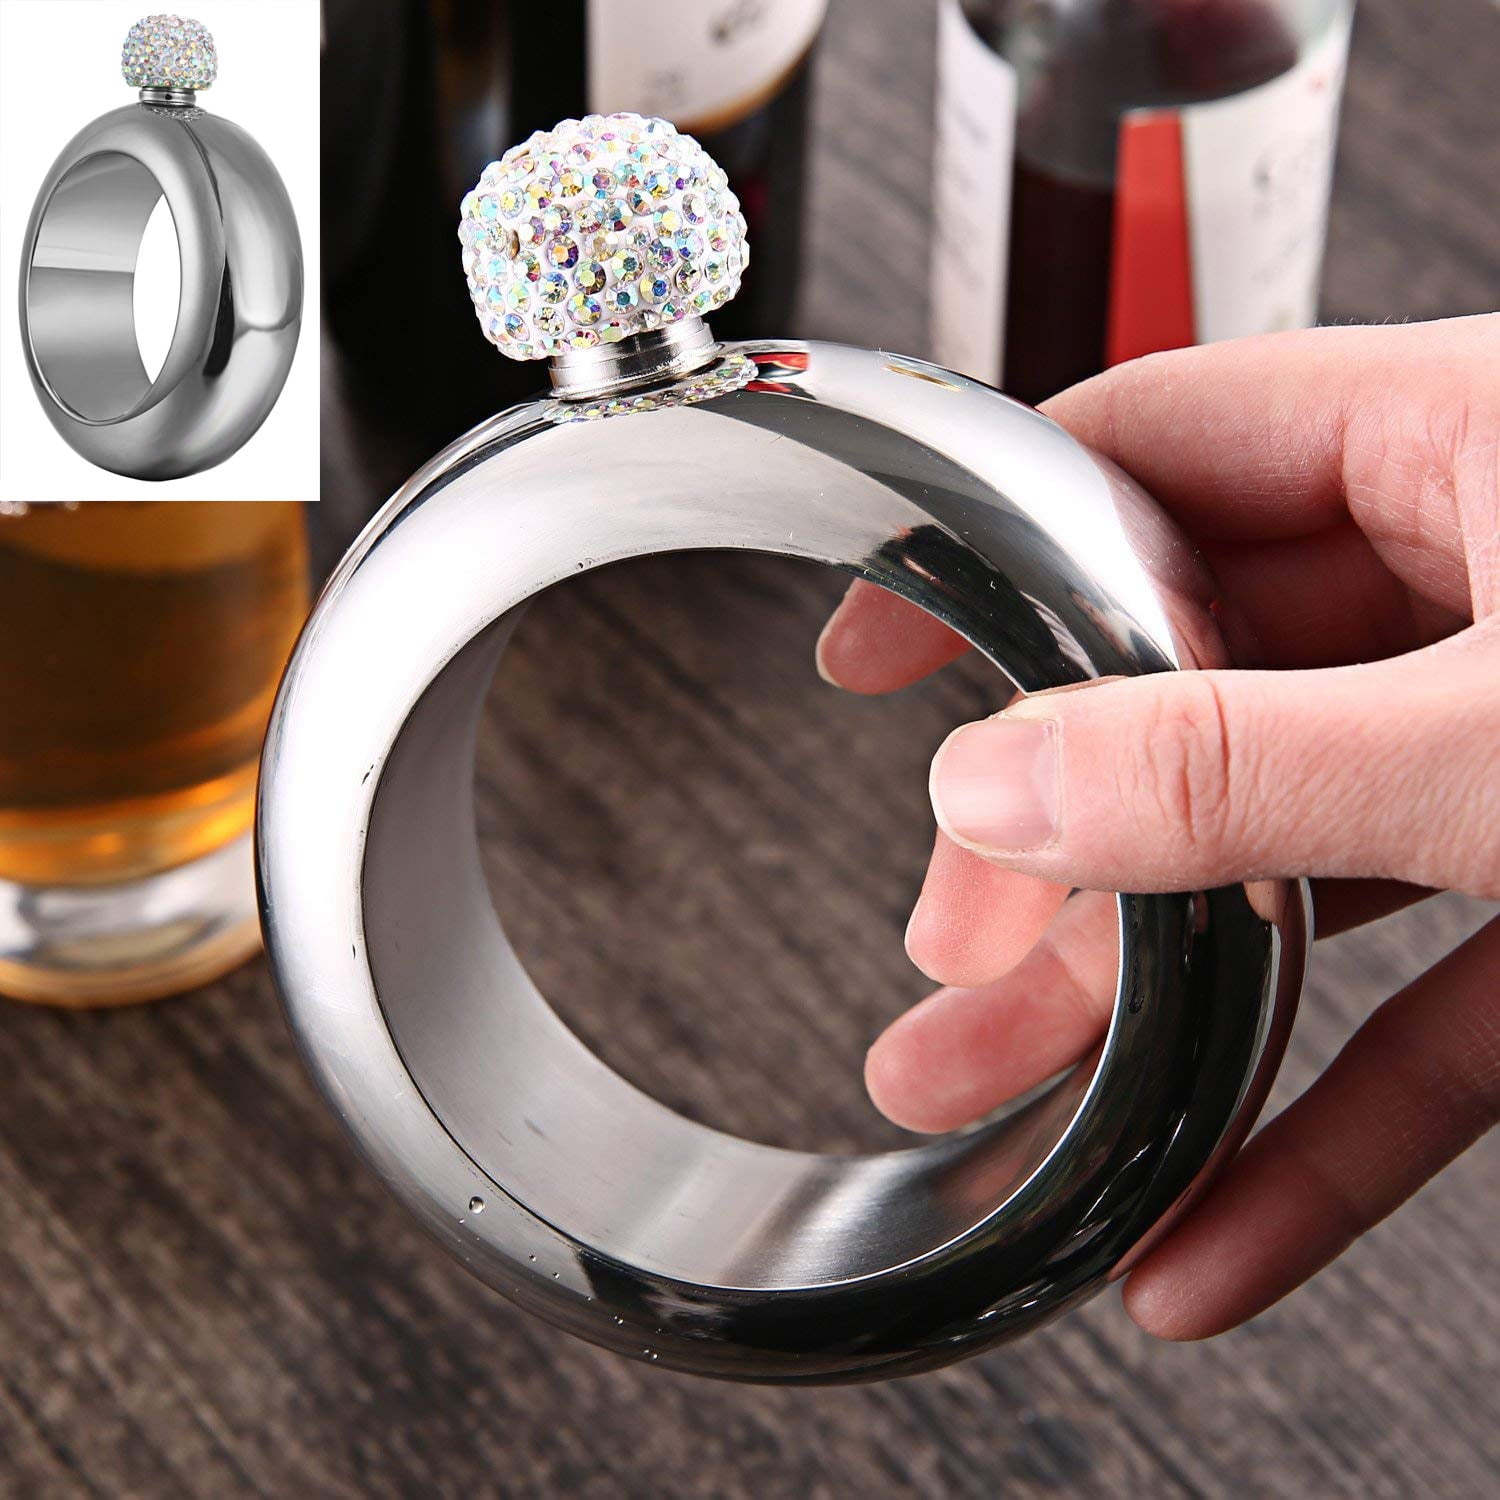 Party Bracelet Bangle Flask With Handmade Cap Stainless Steel Party Accessory For Women Girls Hidden Liquor Flask With Luxury Box And Funnel 